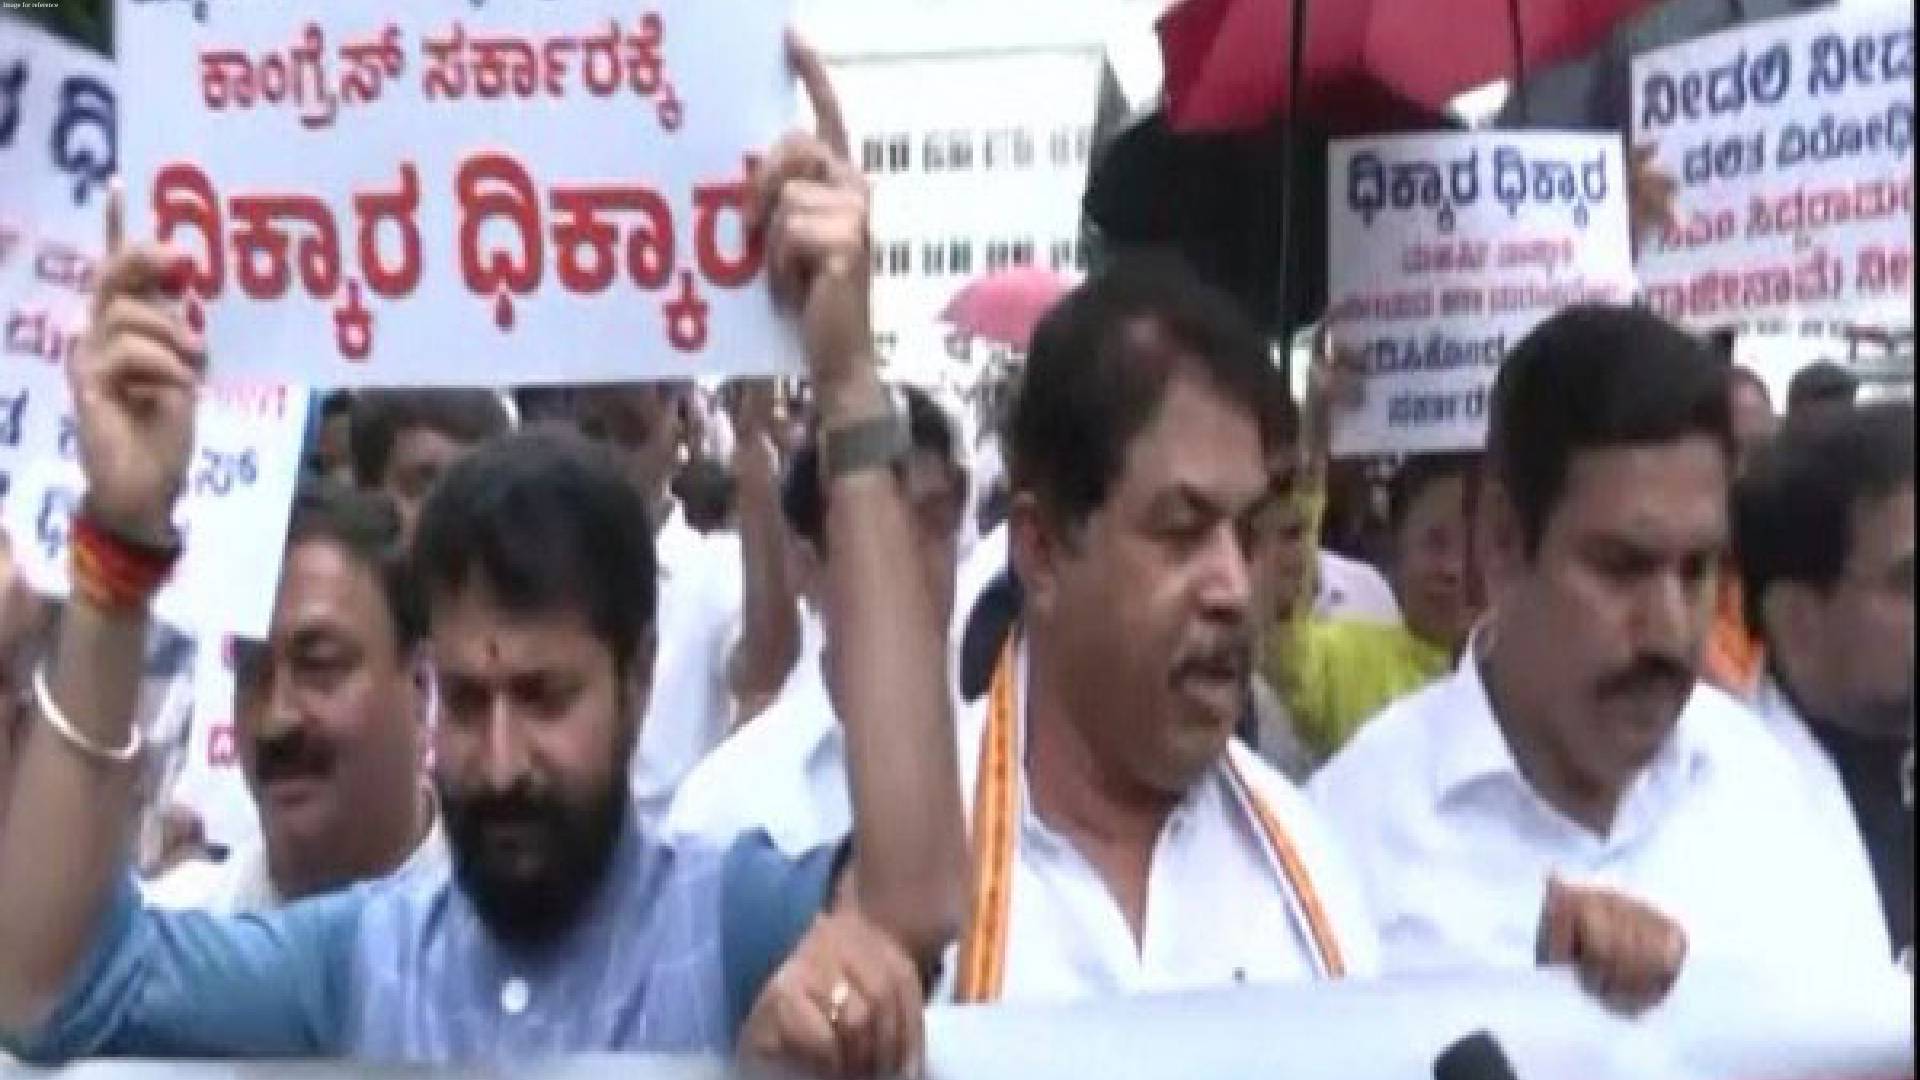 Karnataka BJP protests alleged Valmiki scam in Vidhan Soudha, Congress hits back say no scam